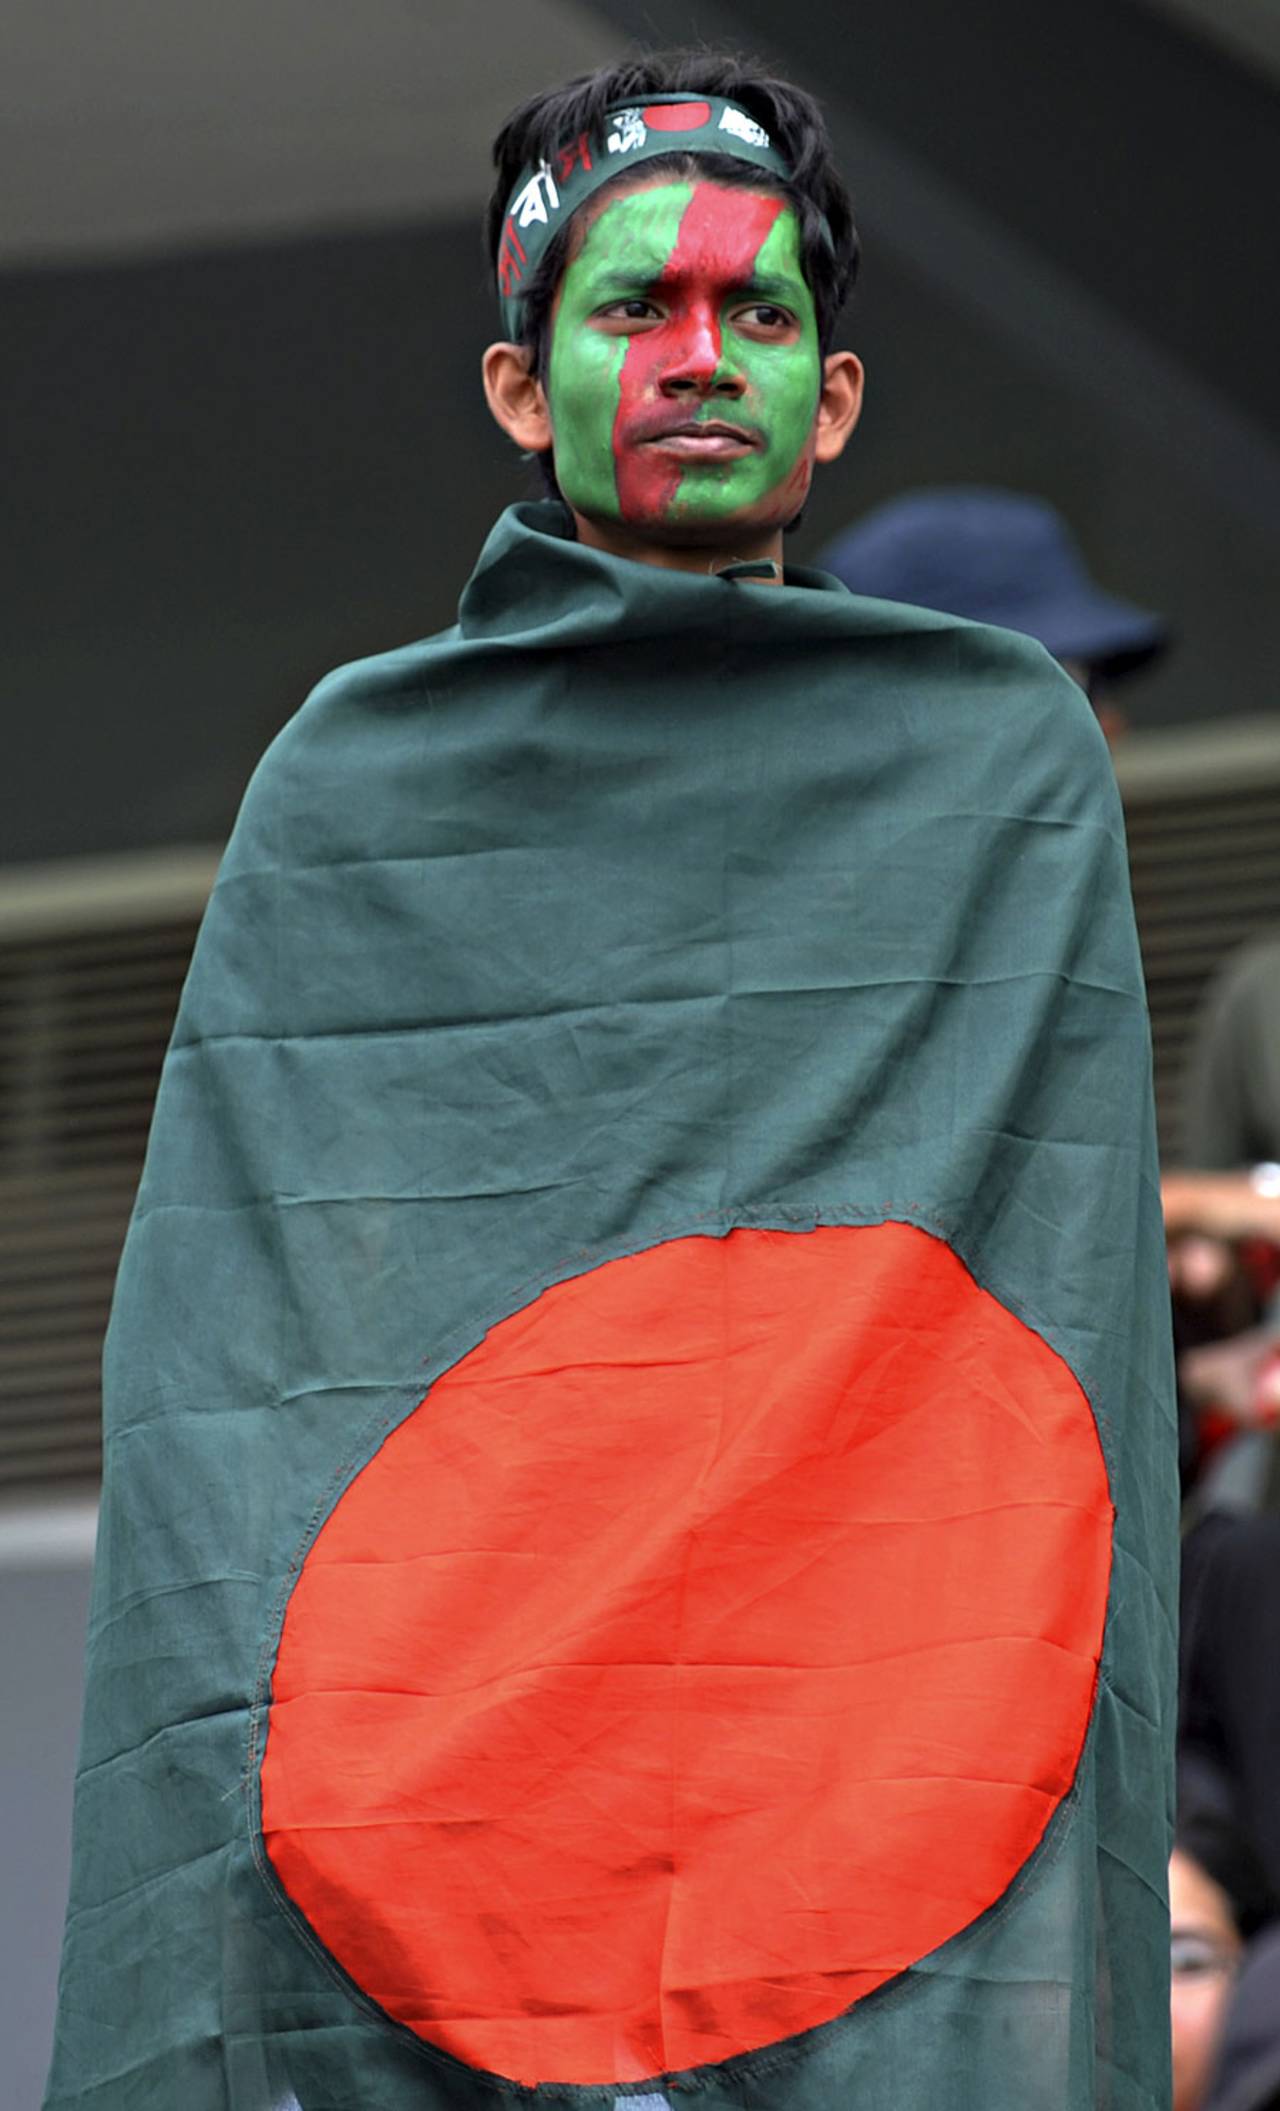 Bangladesh lost wickets at key intervals much to the disappointment of their fans, Bangladesh v Australia, 1st ODI, Mirpur, April 9, 2011